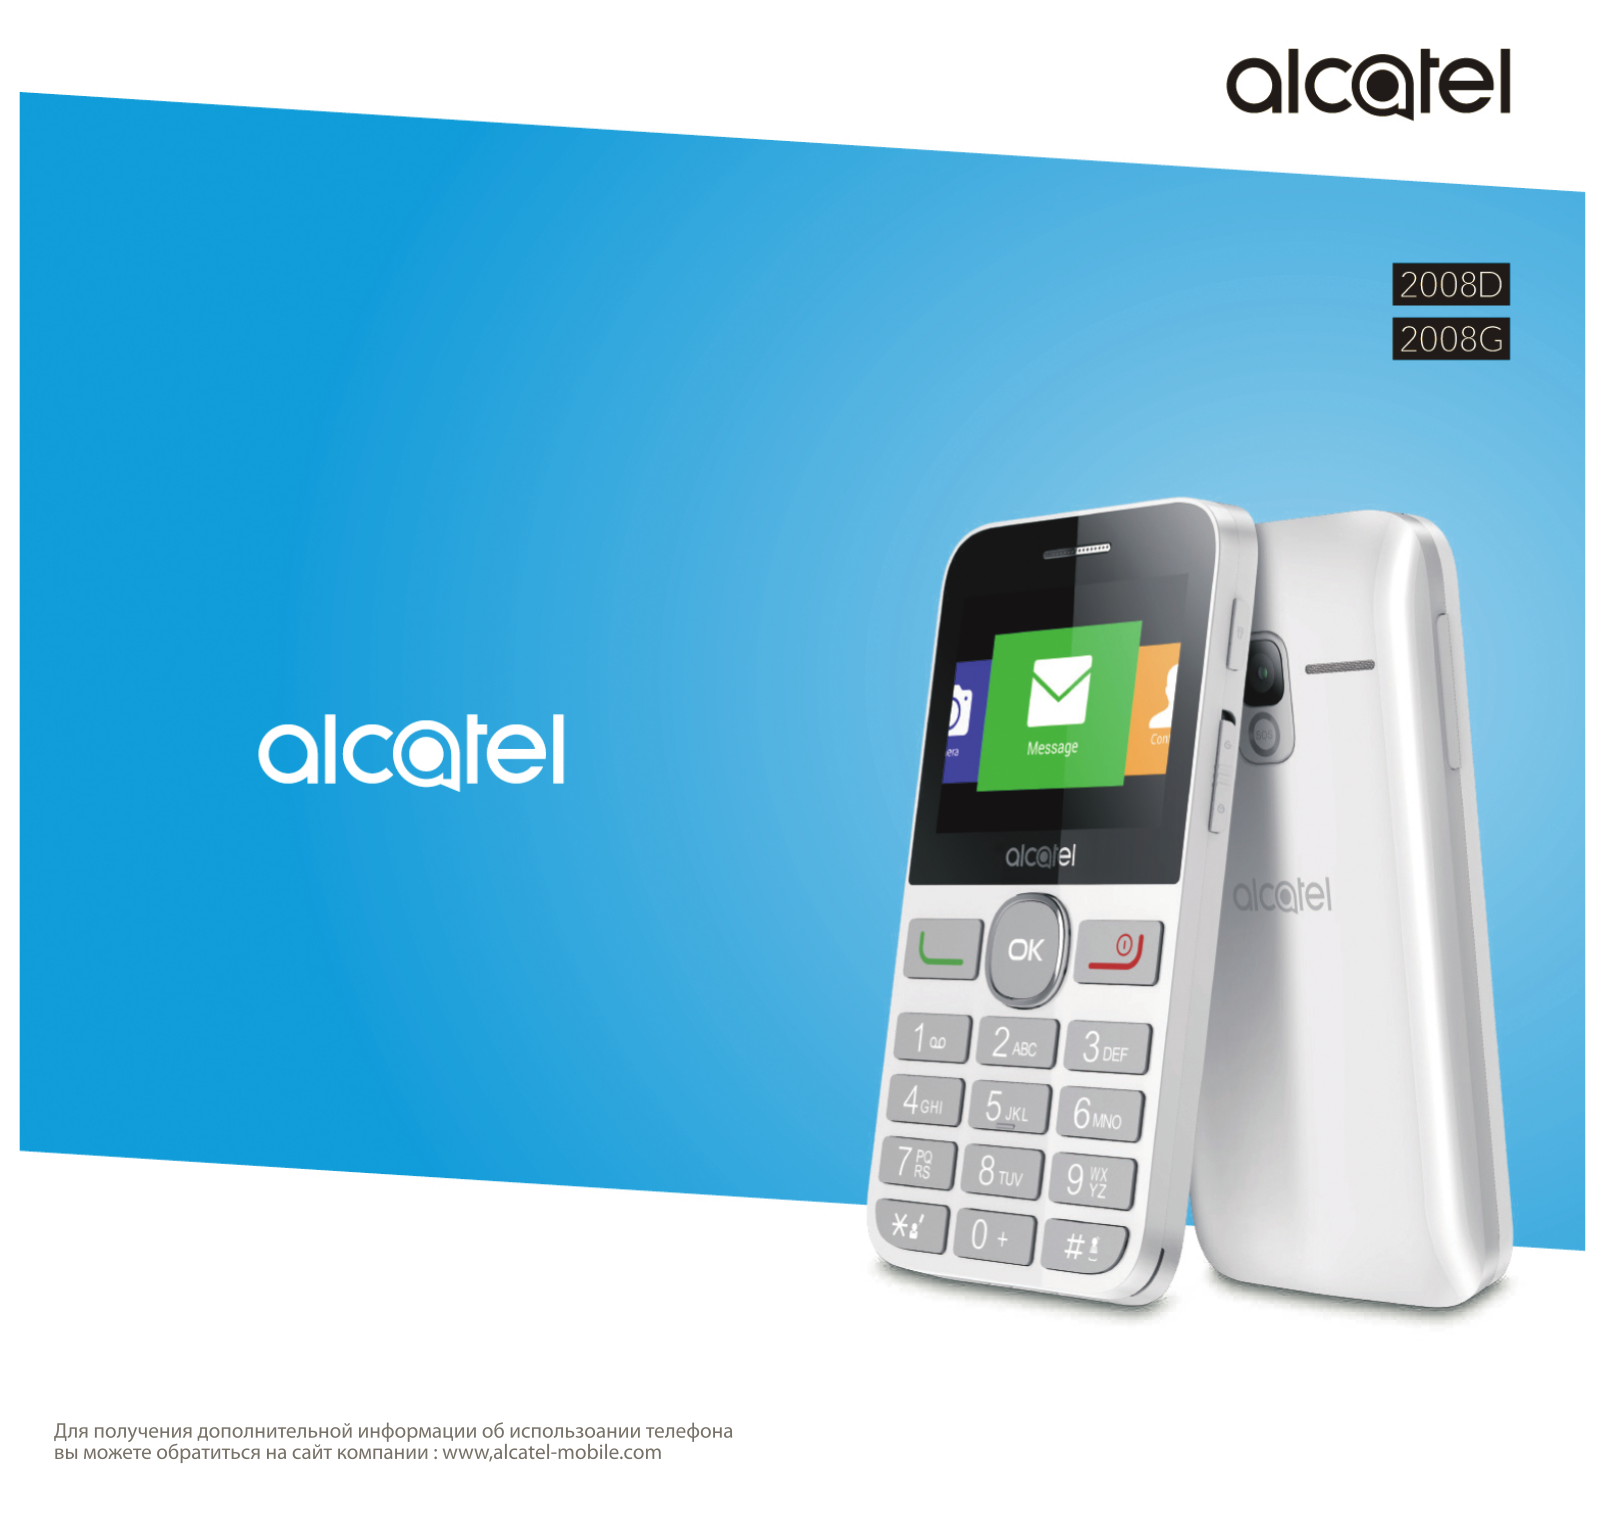 Alcatel One Touch 2008D User manual